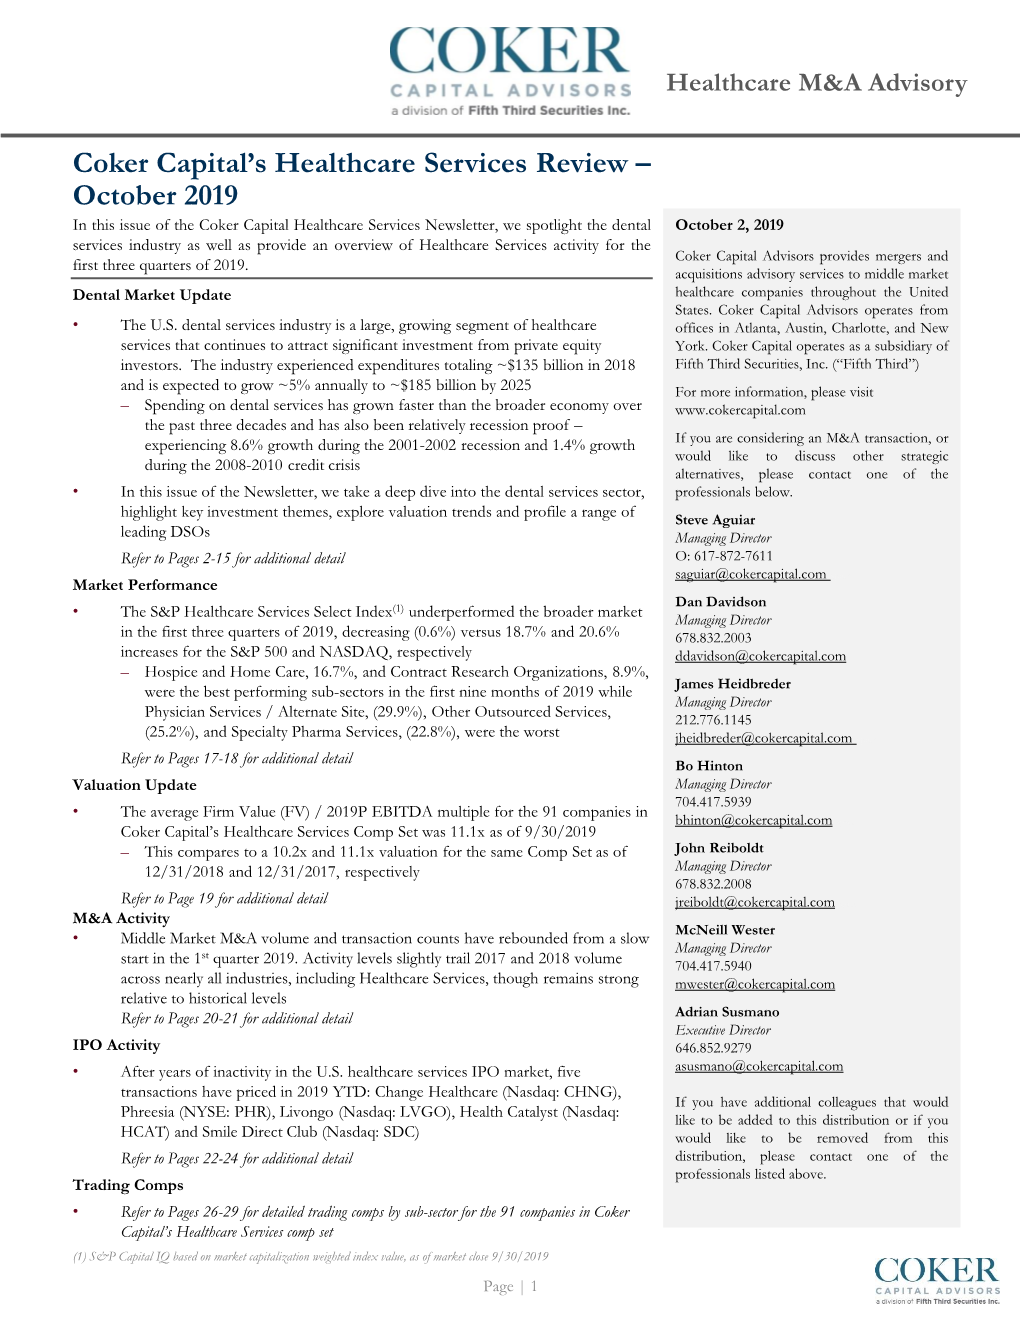 Coker Capital's Healthcare Services Review – October 2019